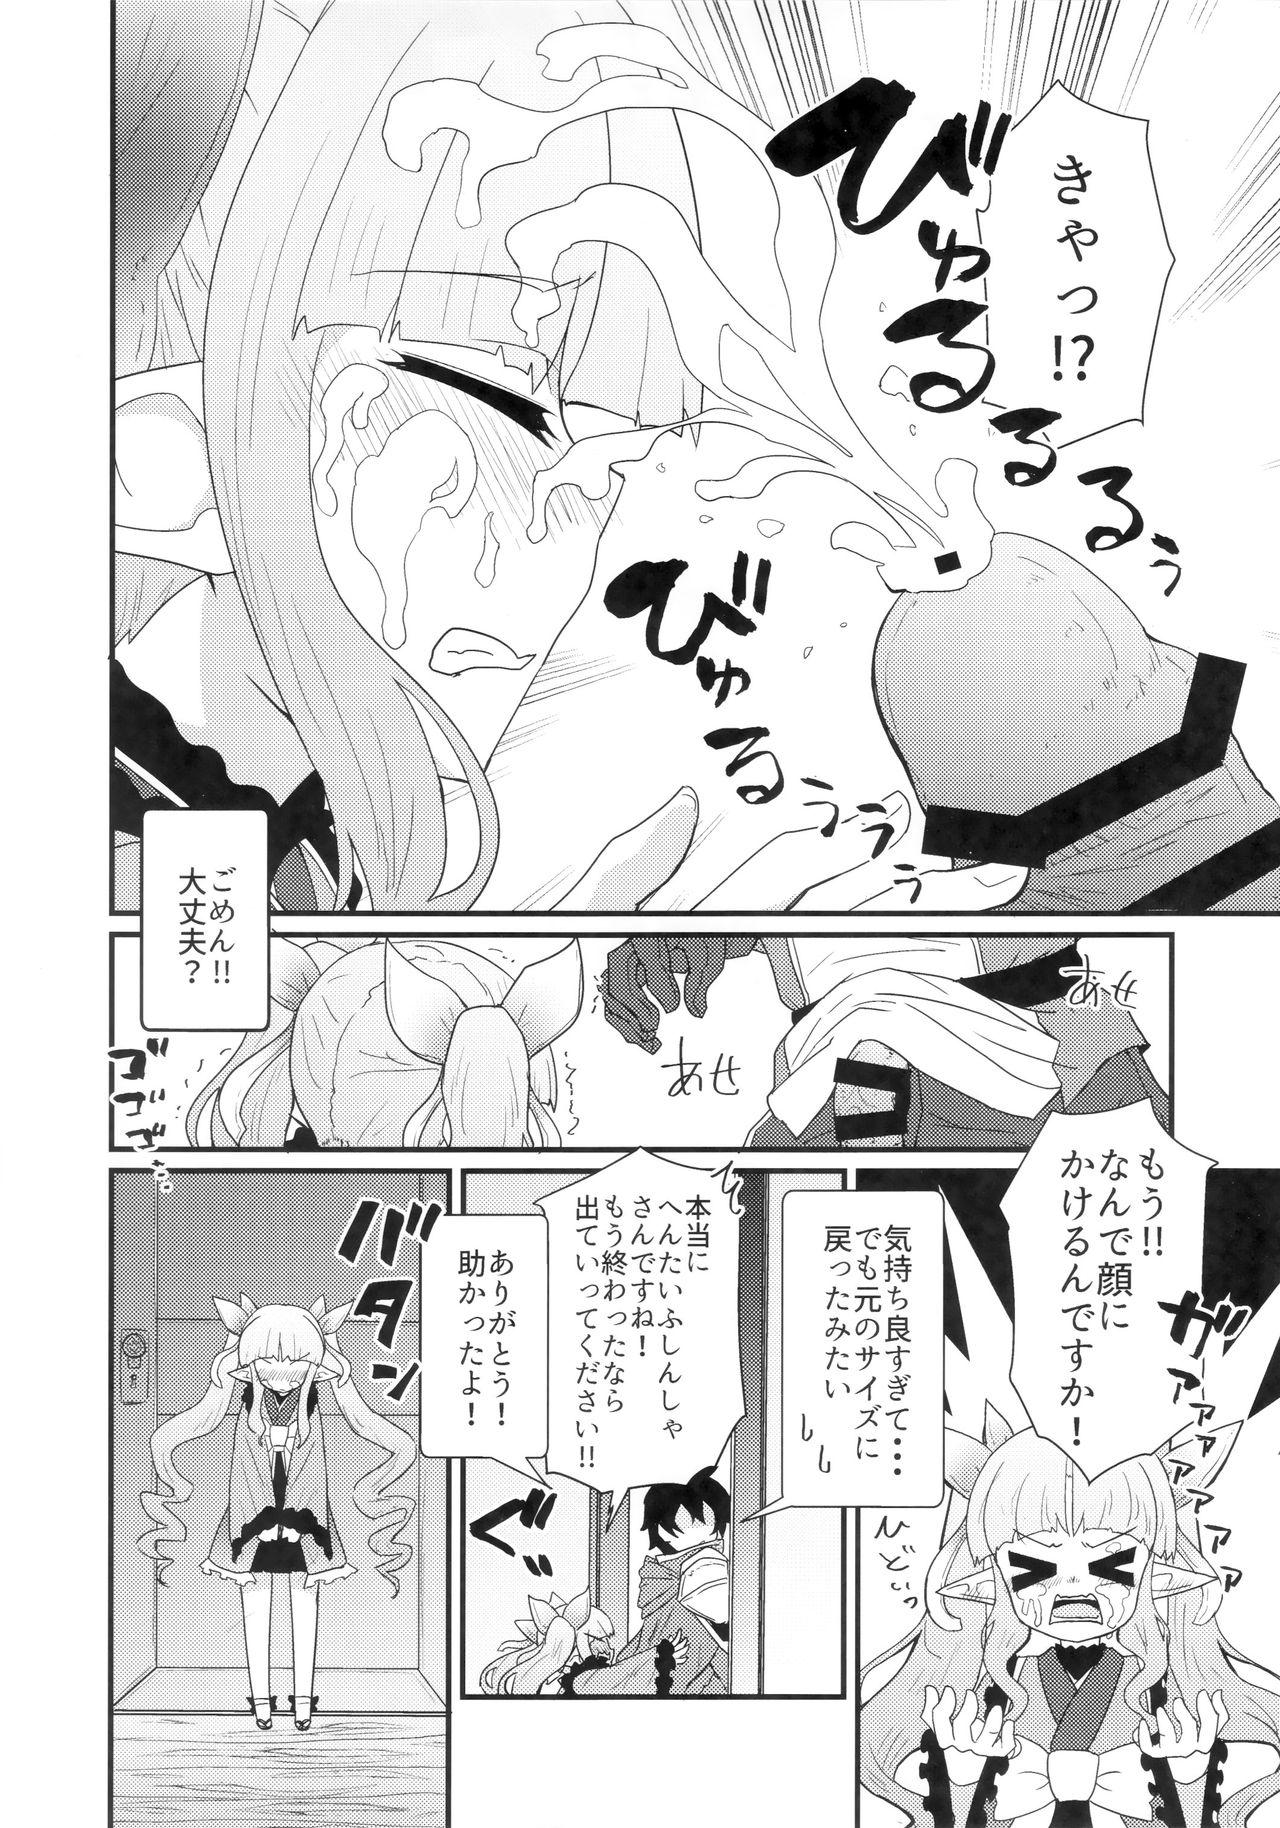 Action Onegai Kyouka-chan - Princess connect Transexual - Page 5